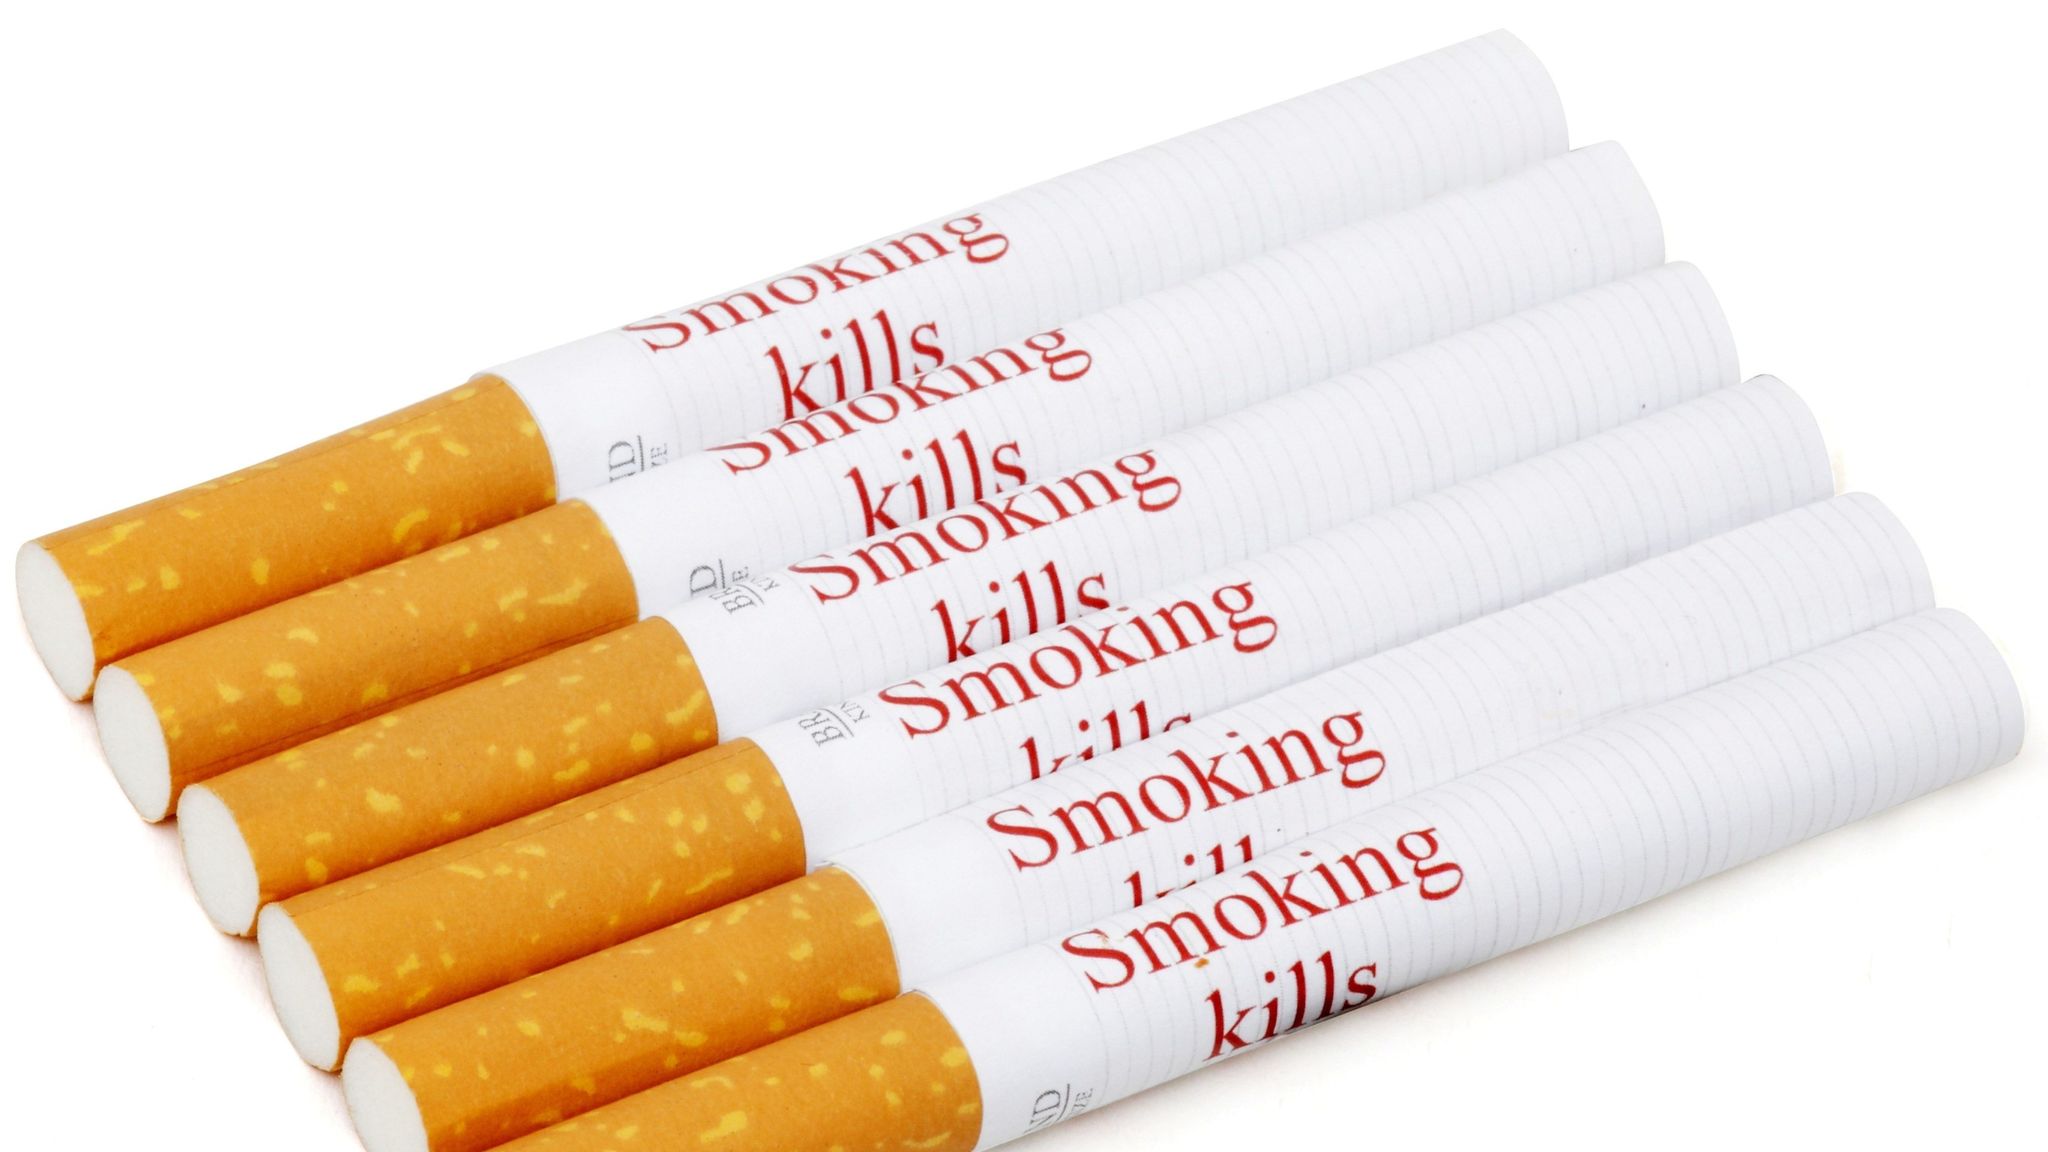 Efforts to Tackle Tobacco Harm Explored by Experts